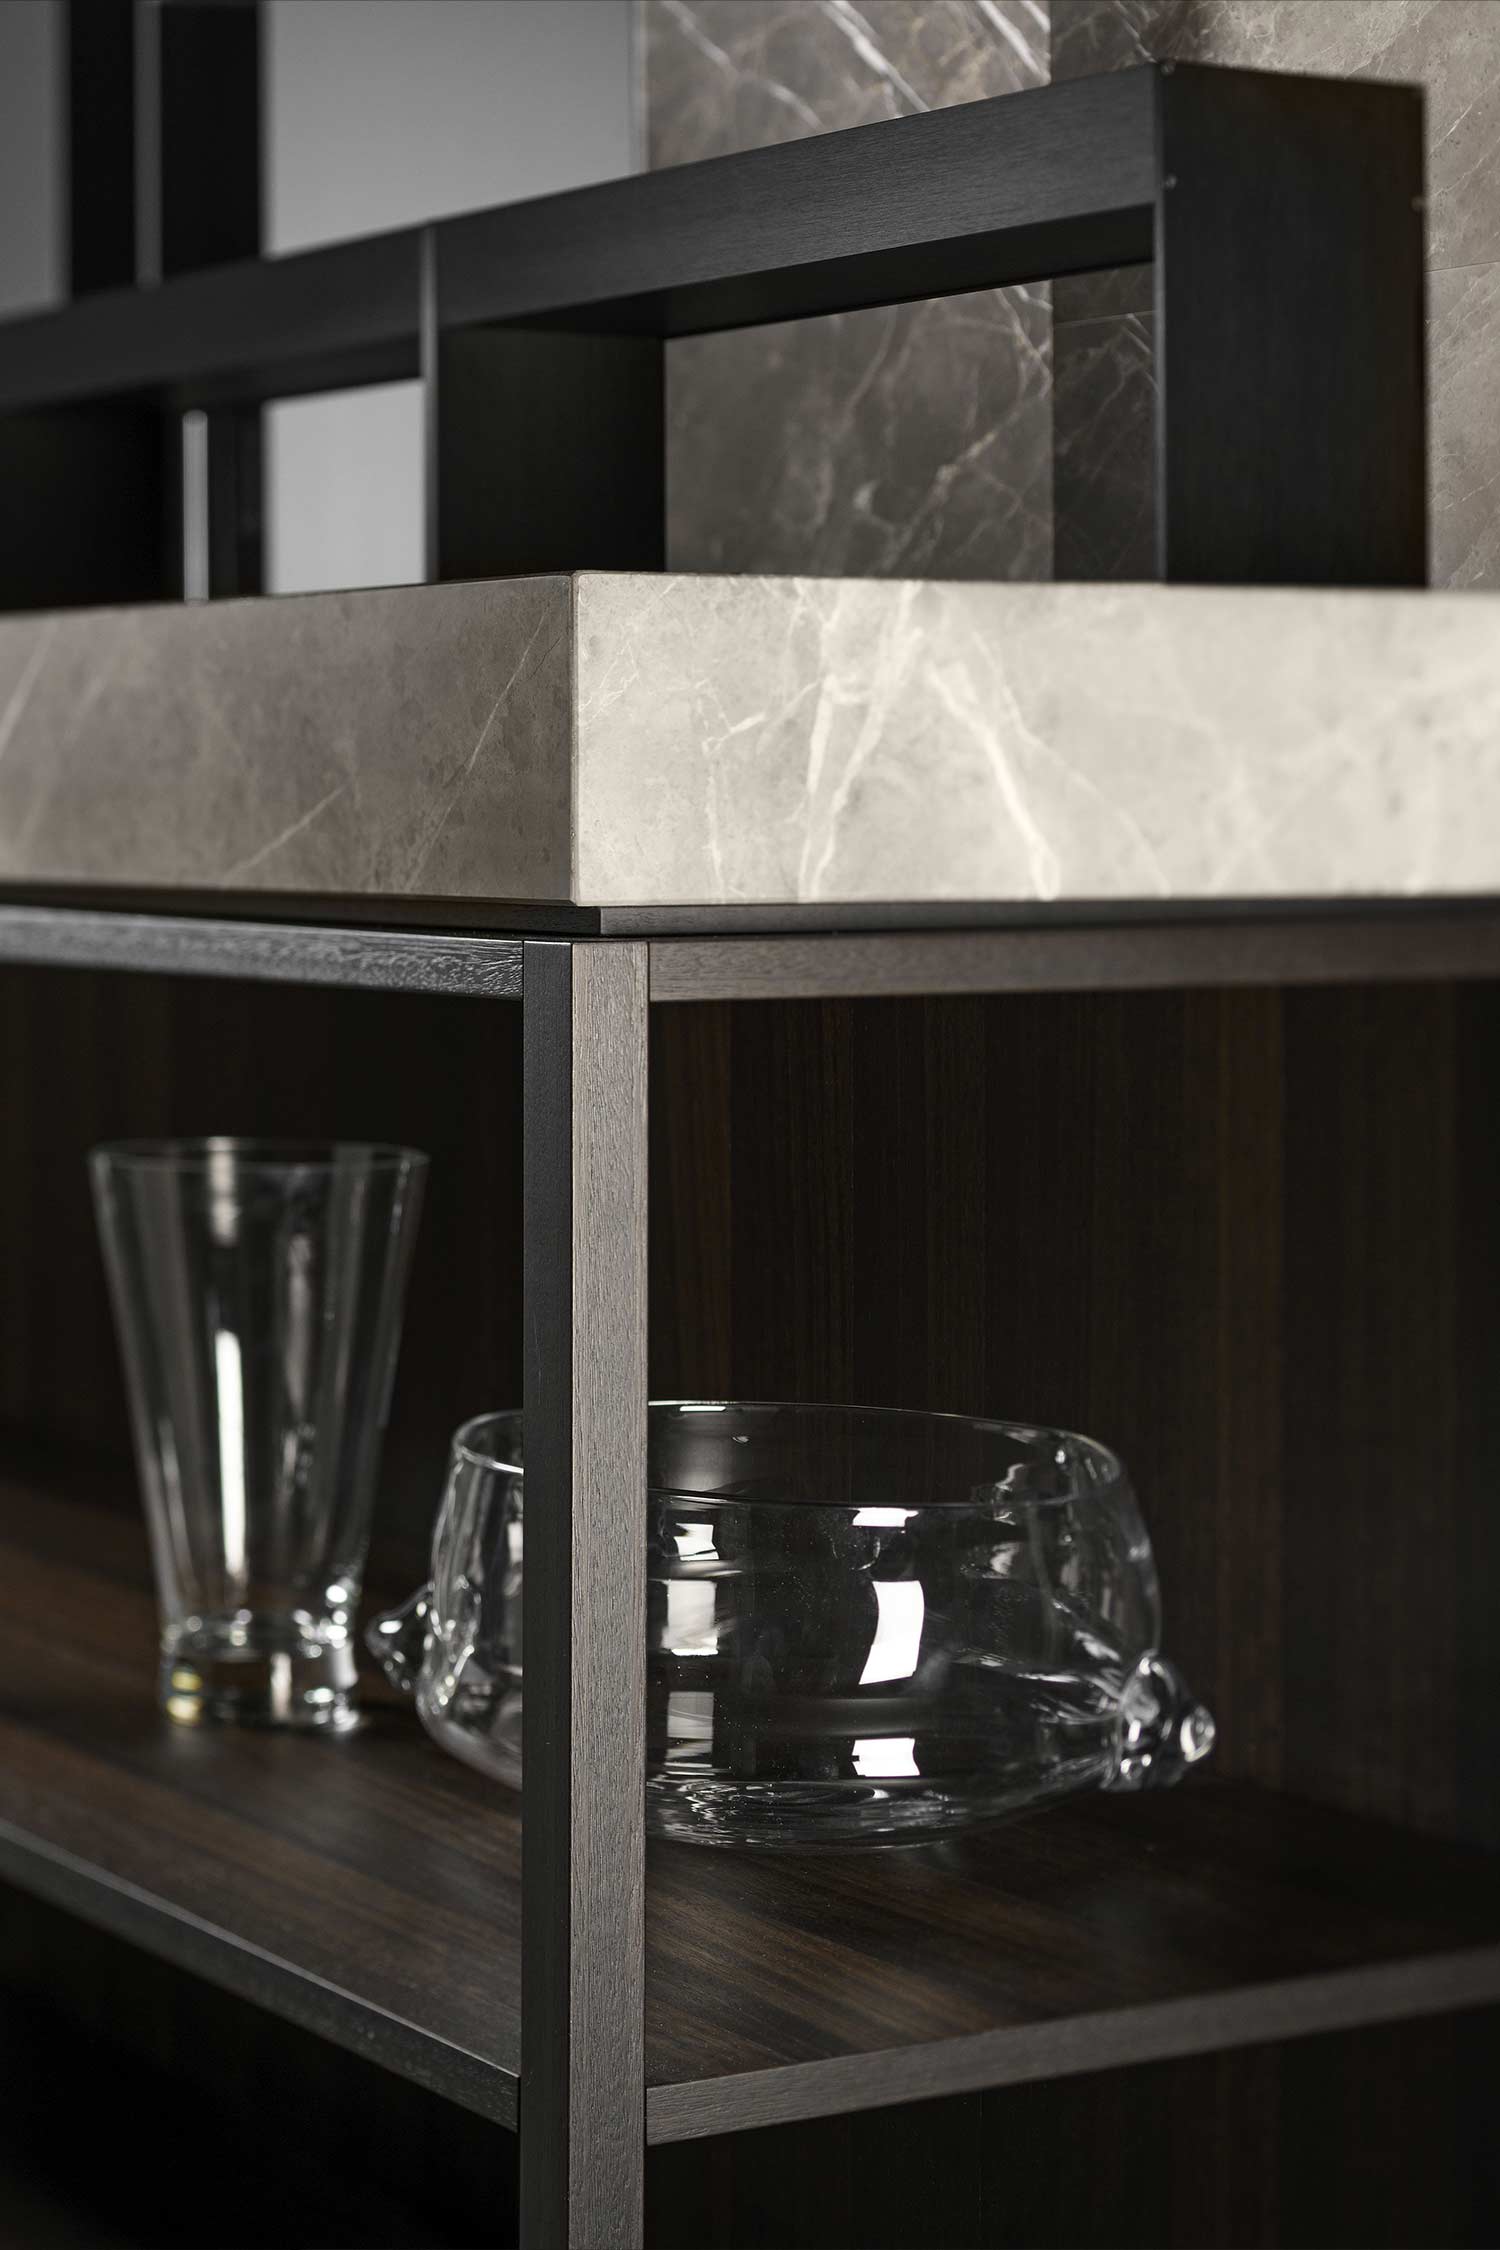 Luxurious Collemandia Marble worktop with elegant gold shades reminiscent of luxurious silk.